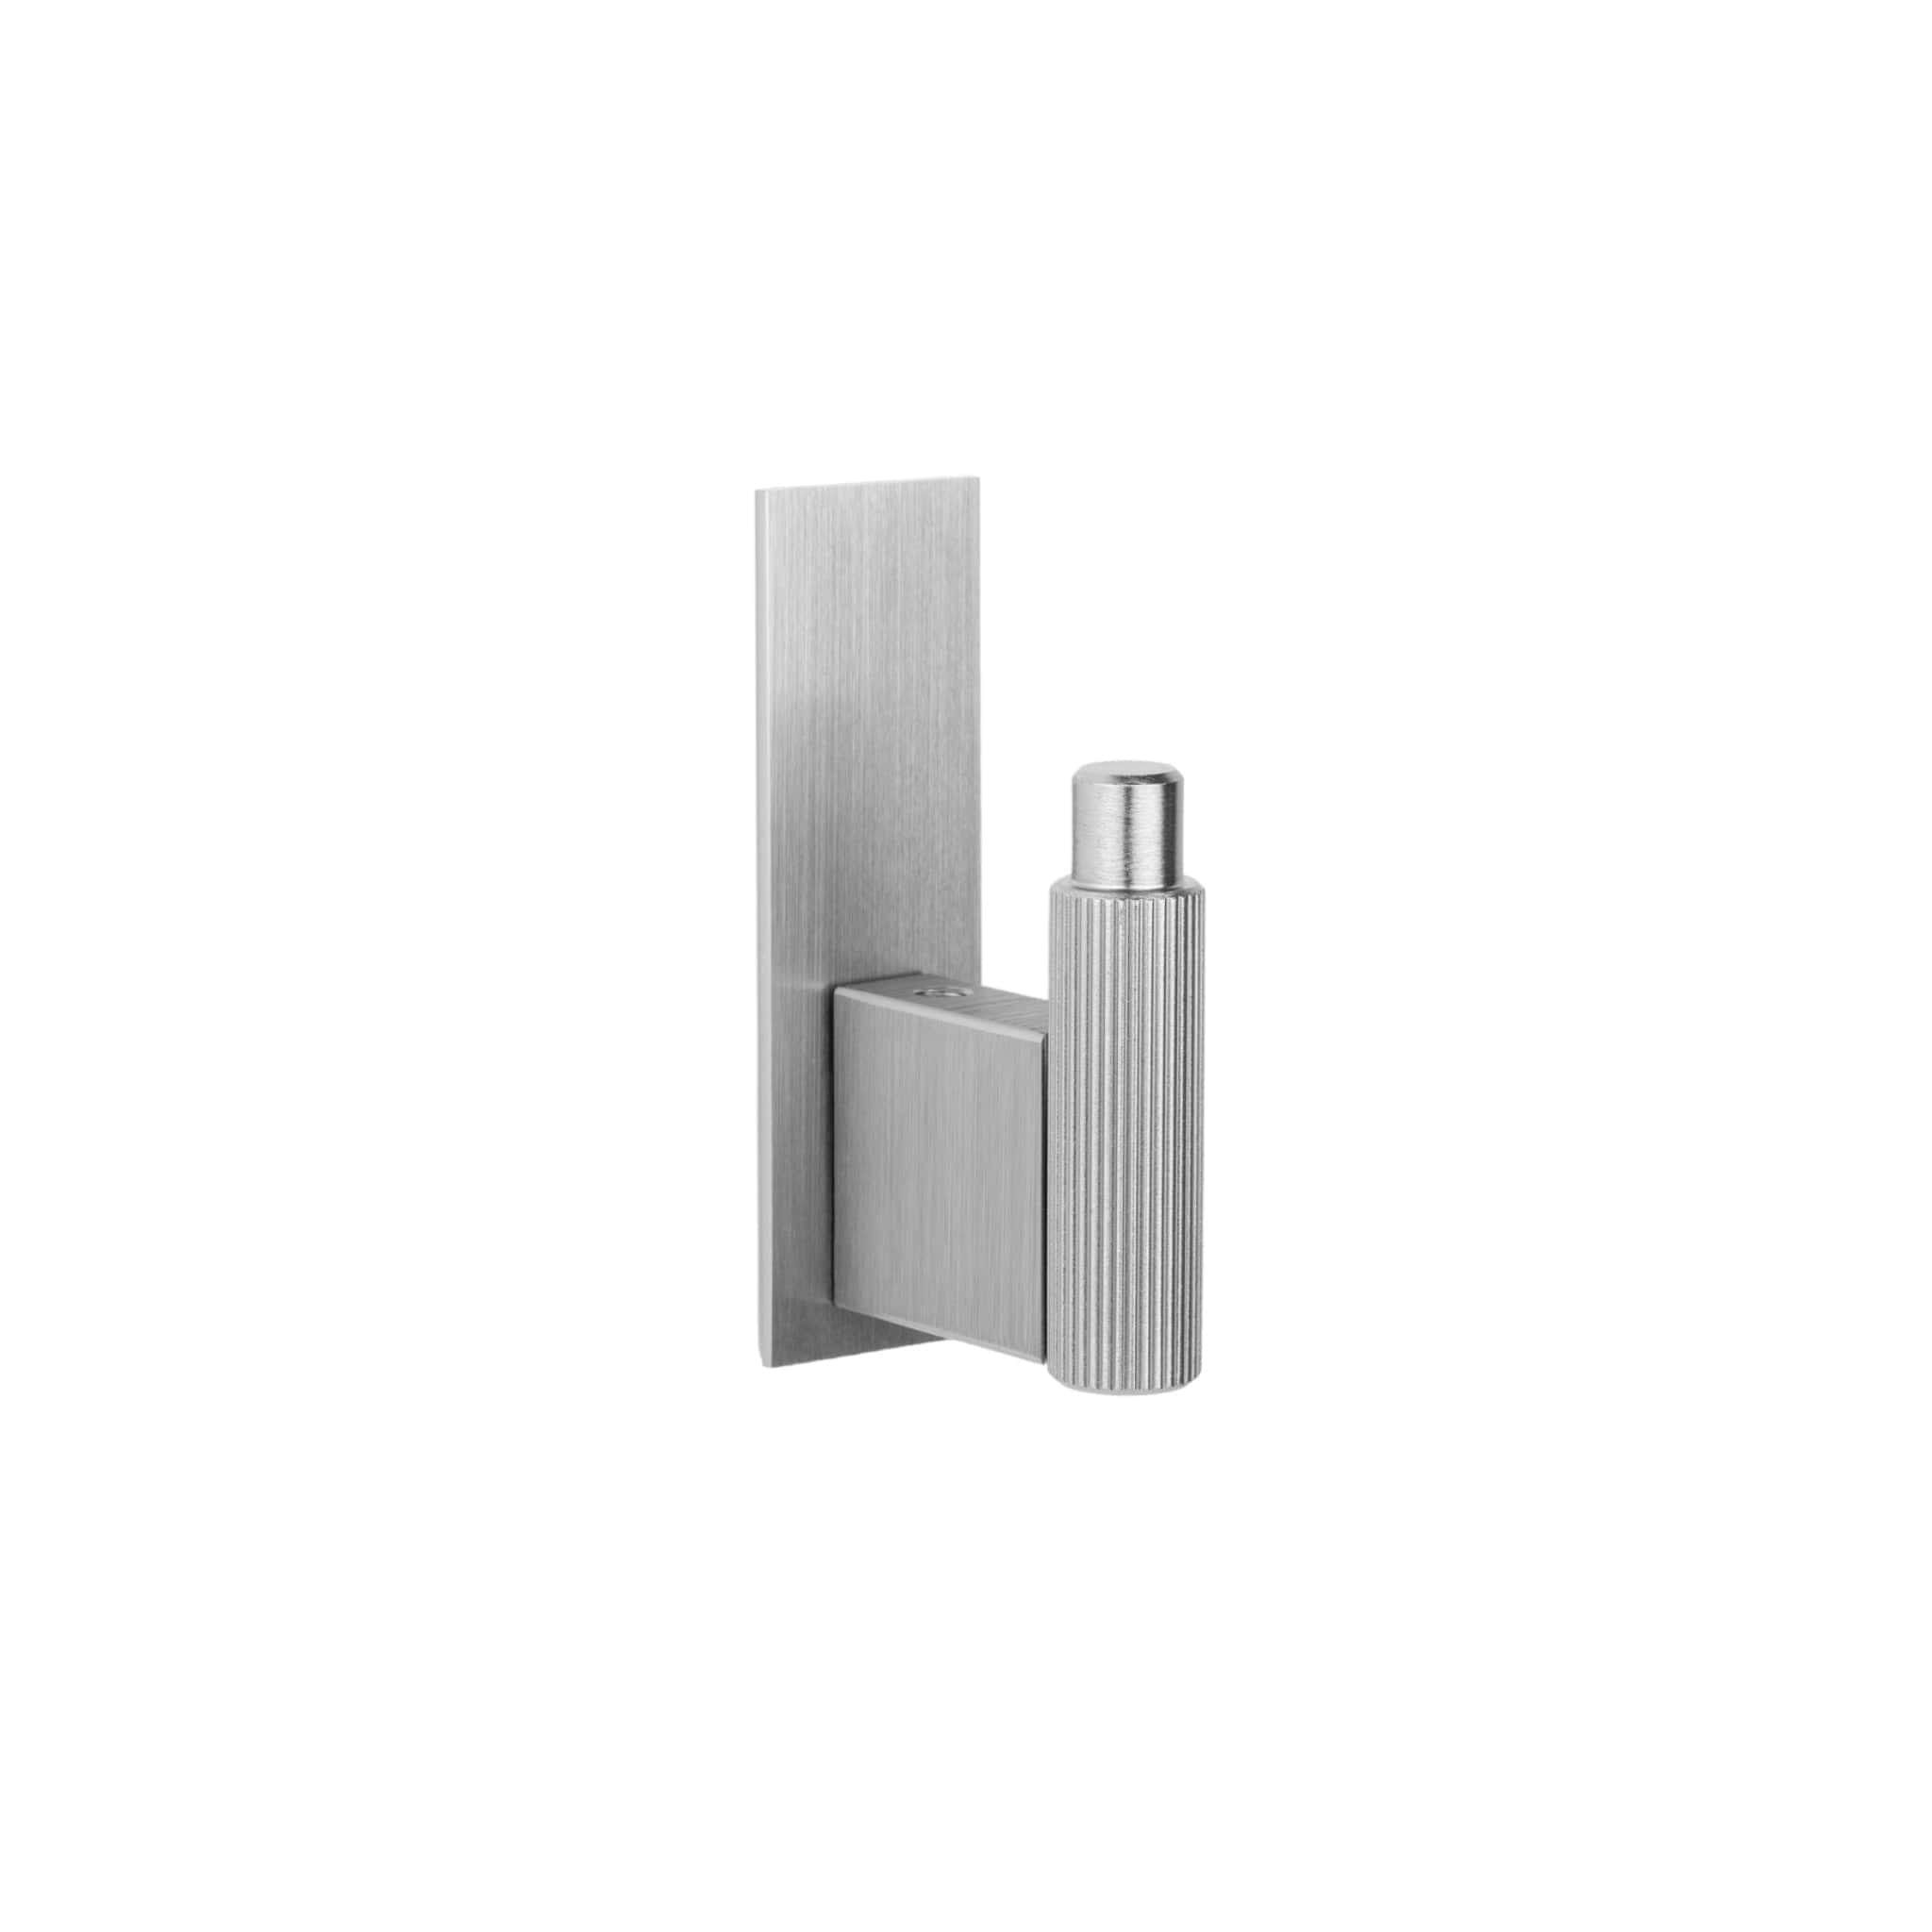 Arpa Plate | Knage i Rustfrit Stål Finish H 80 mm x D 43 mm Viefe FINICC